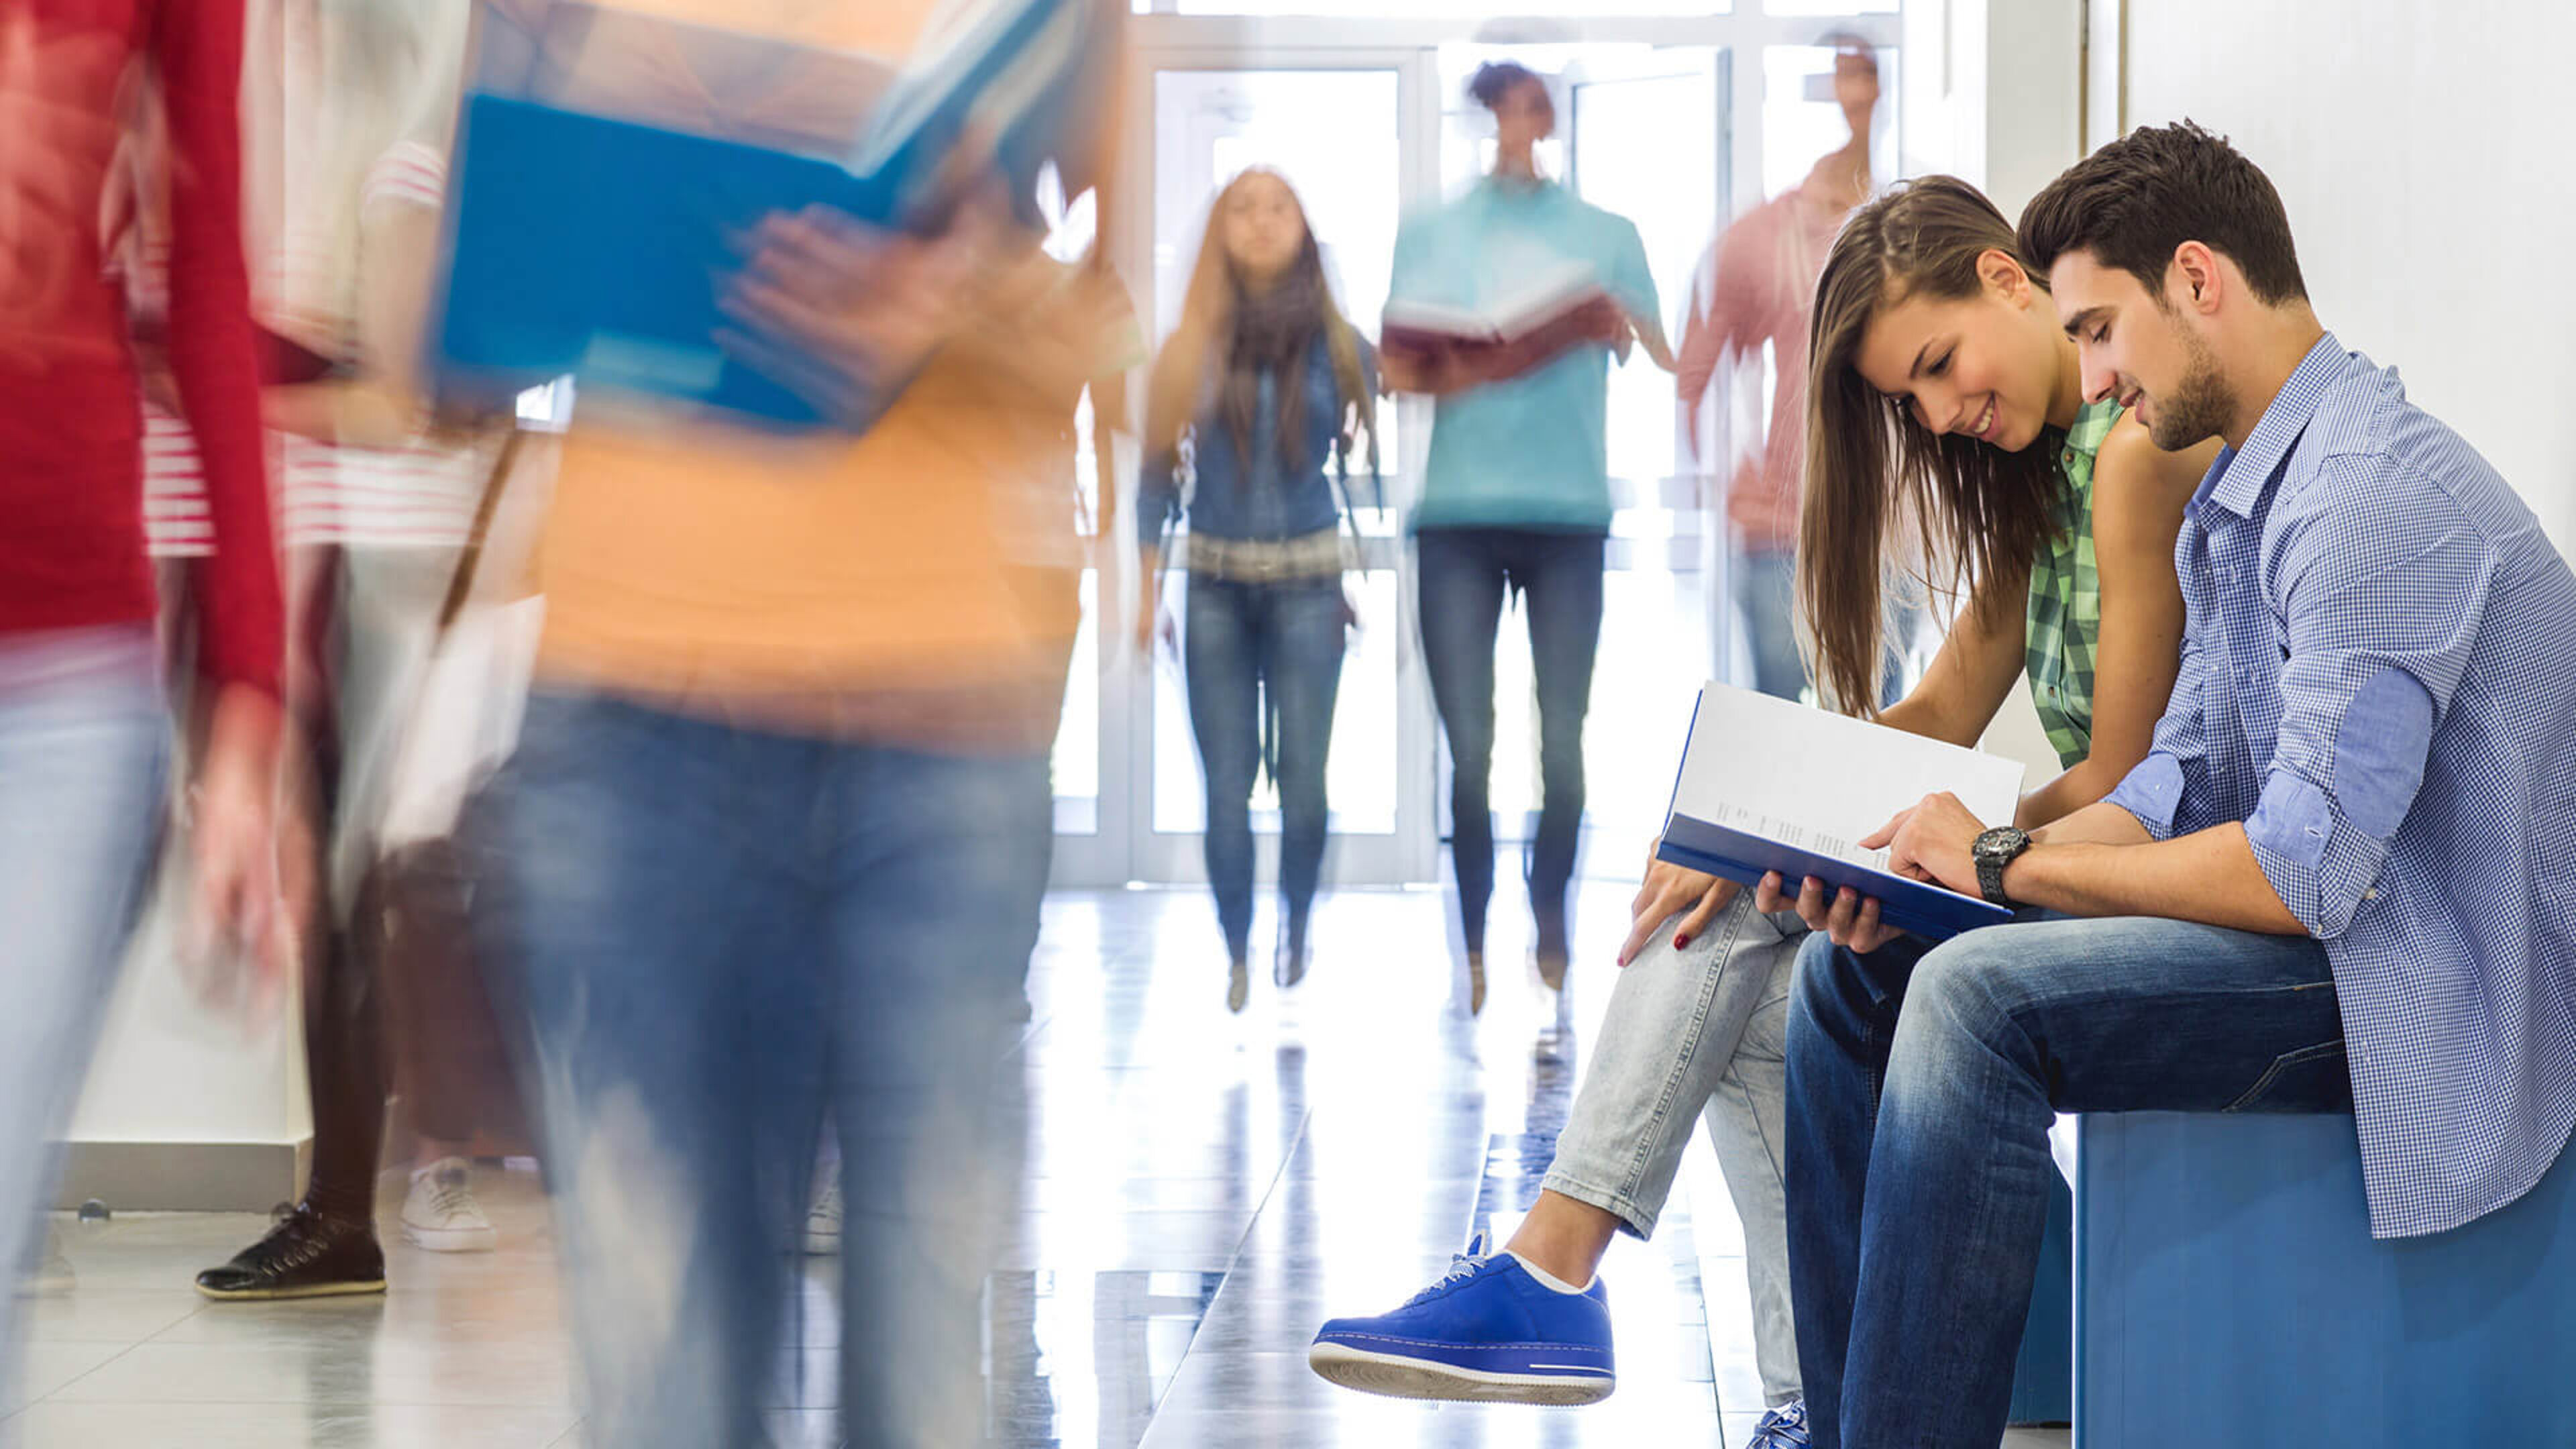 A focused young man and woman review a textbook together on a bench in a bustling school corridor, surrounded by motion-blurred figures of passing students.